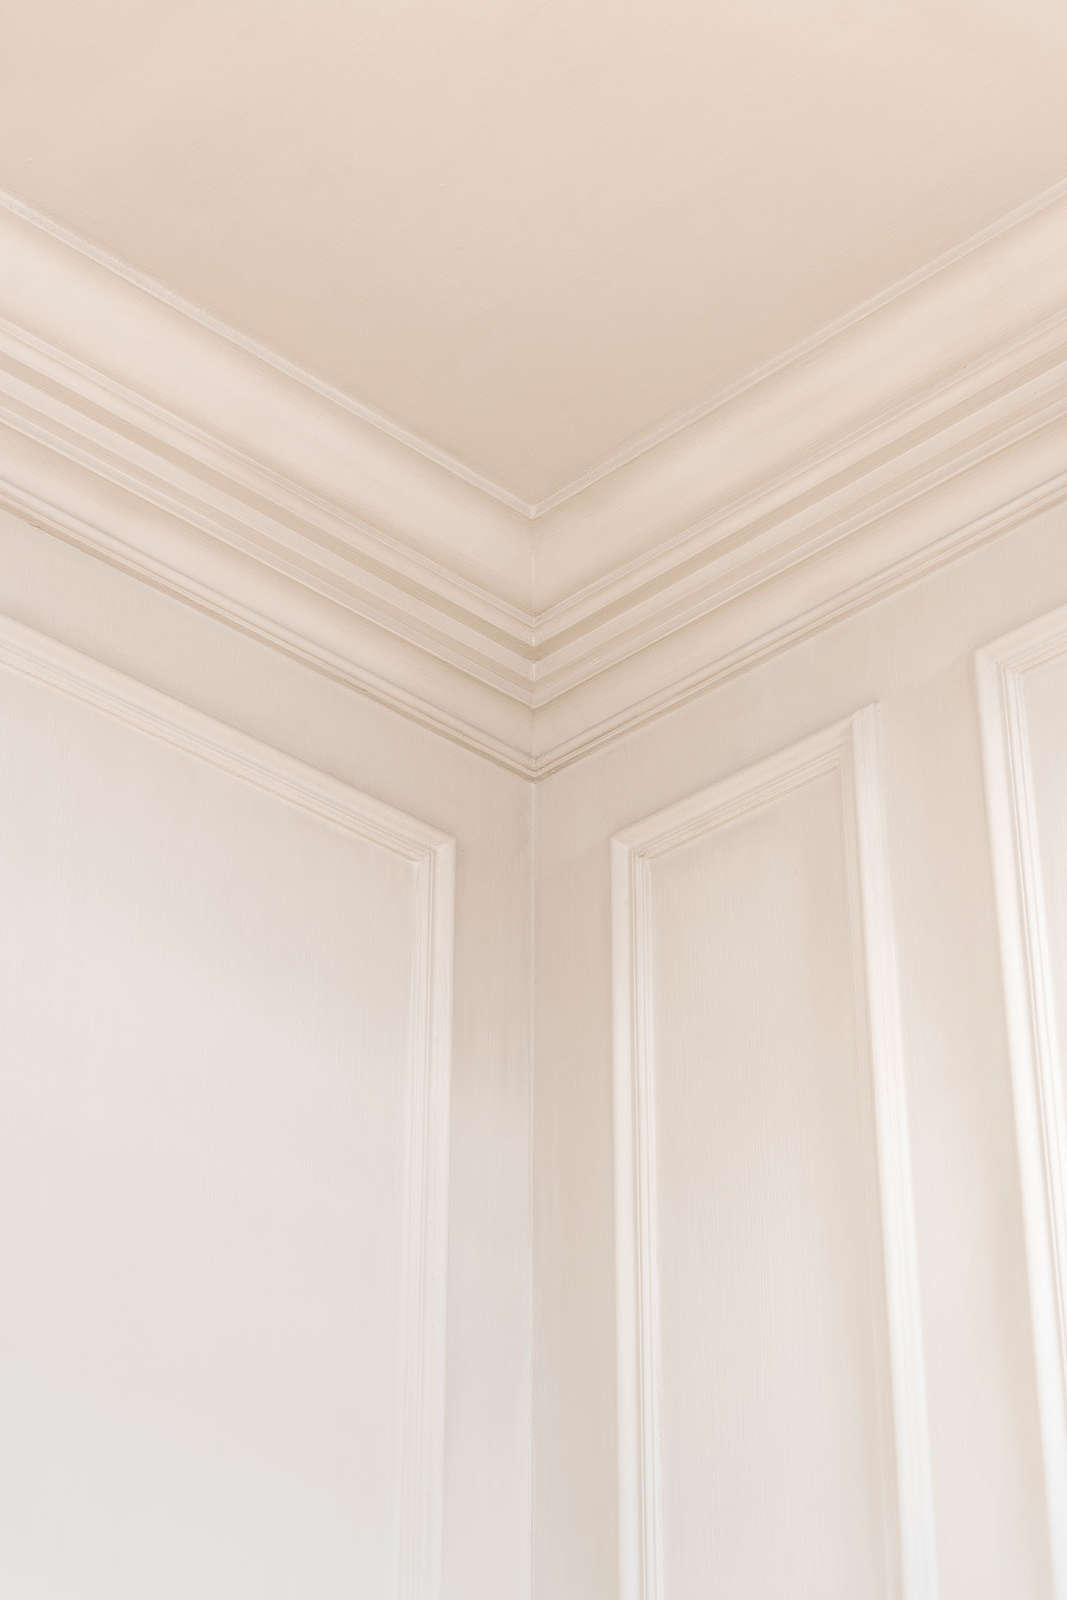             Classic wall moulding Byblos - P4020
        